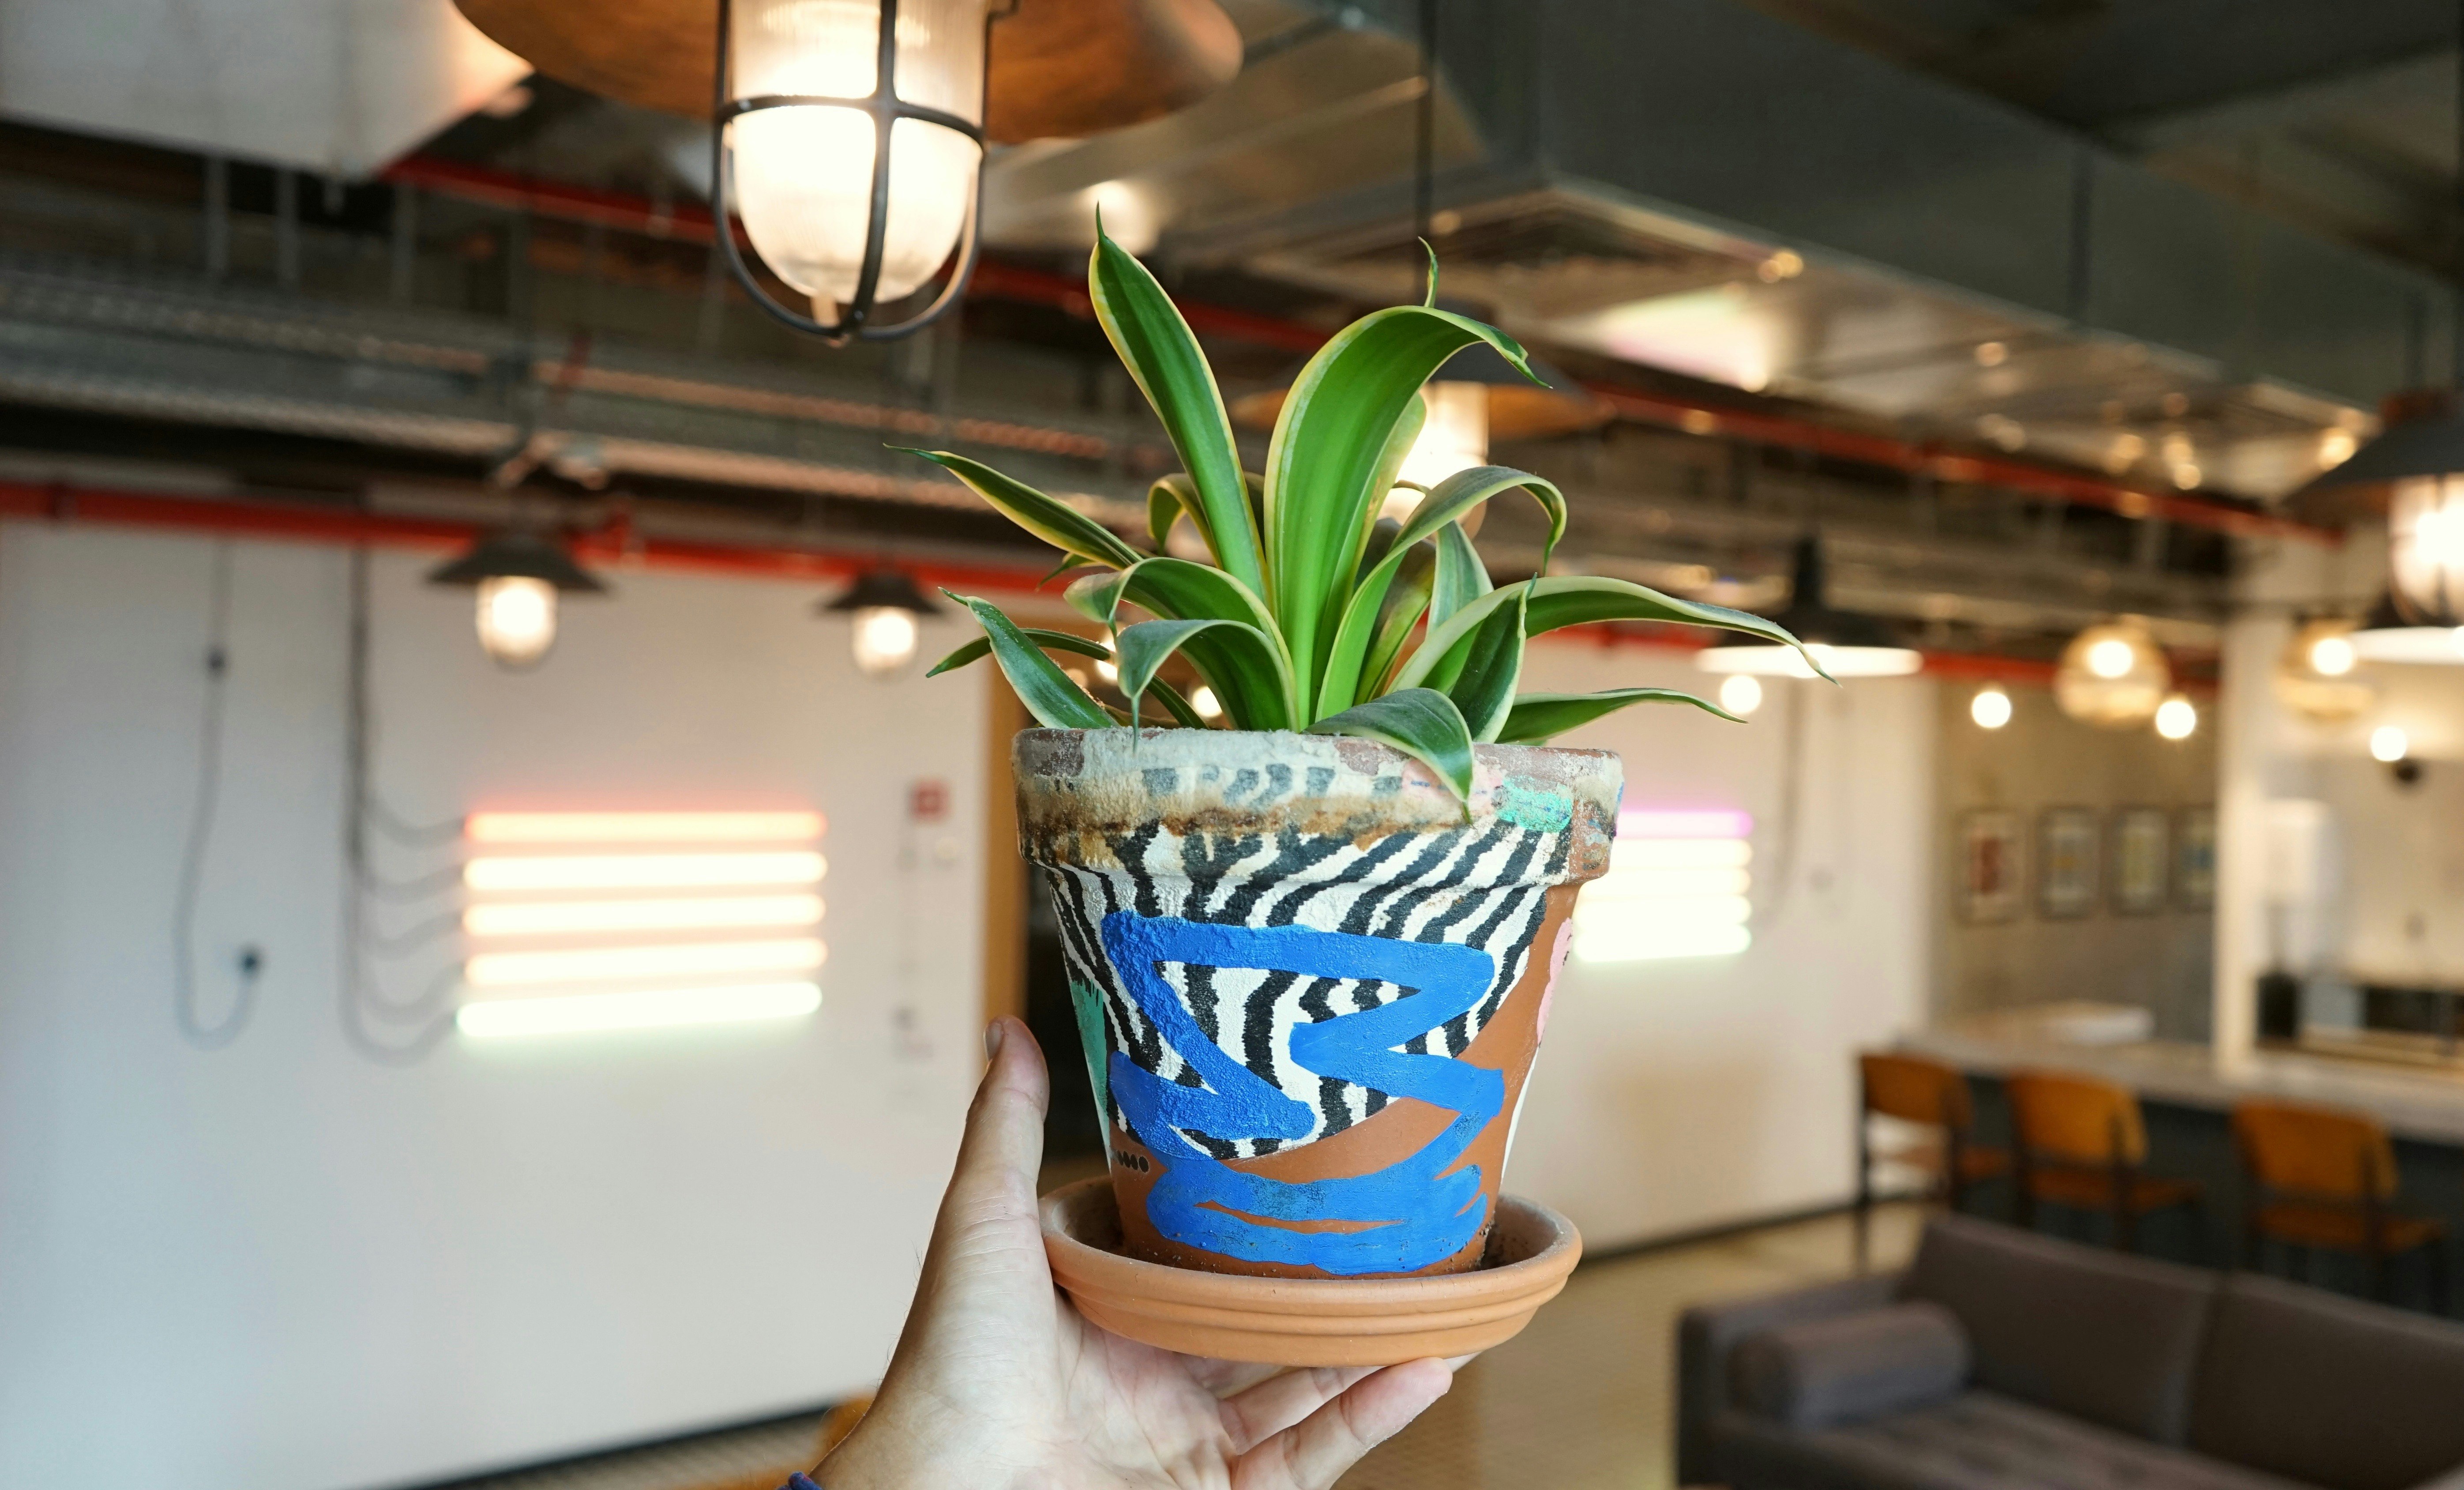 green plant in blue and white ceramic pot